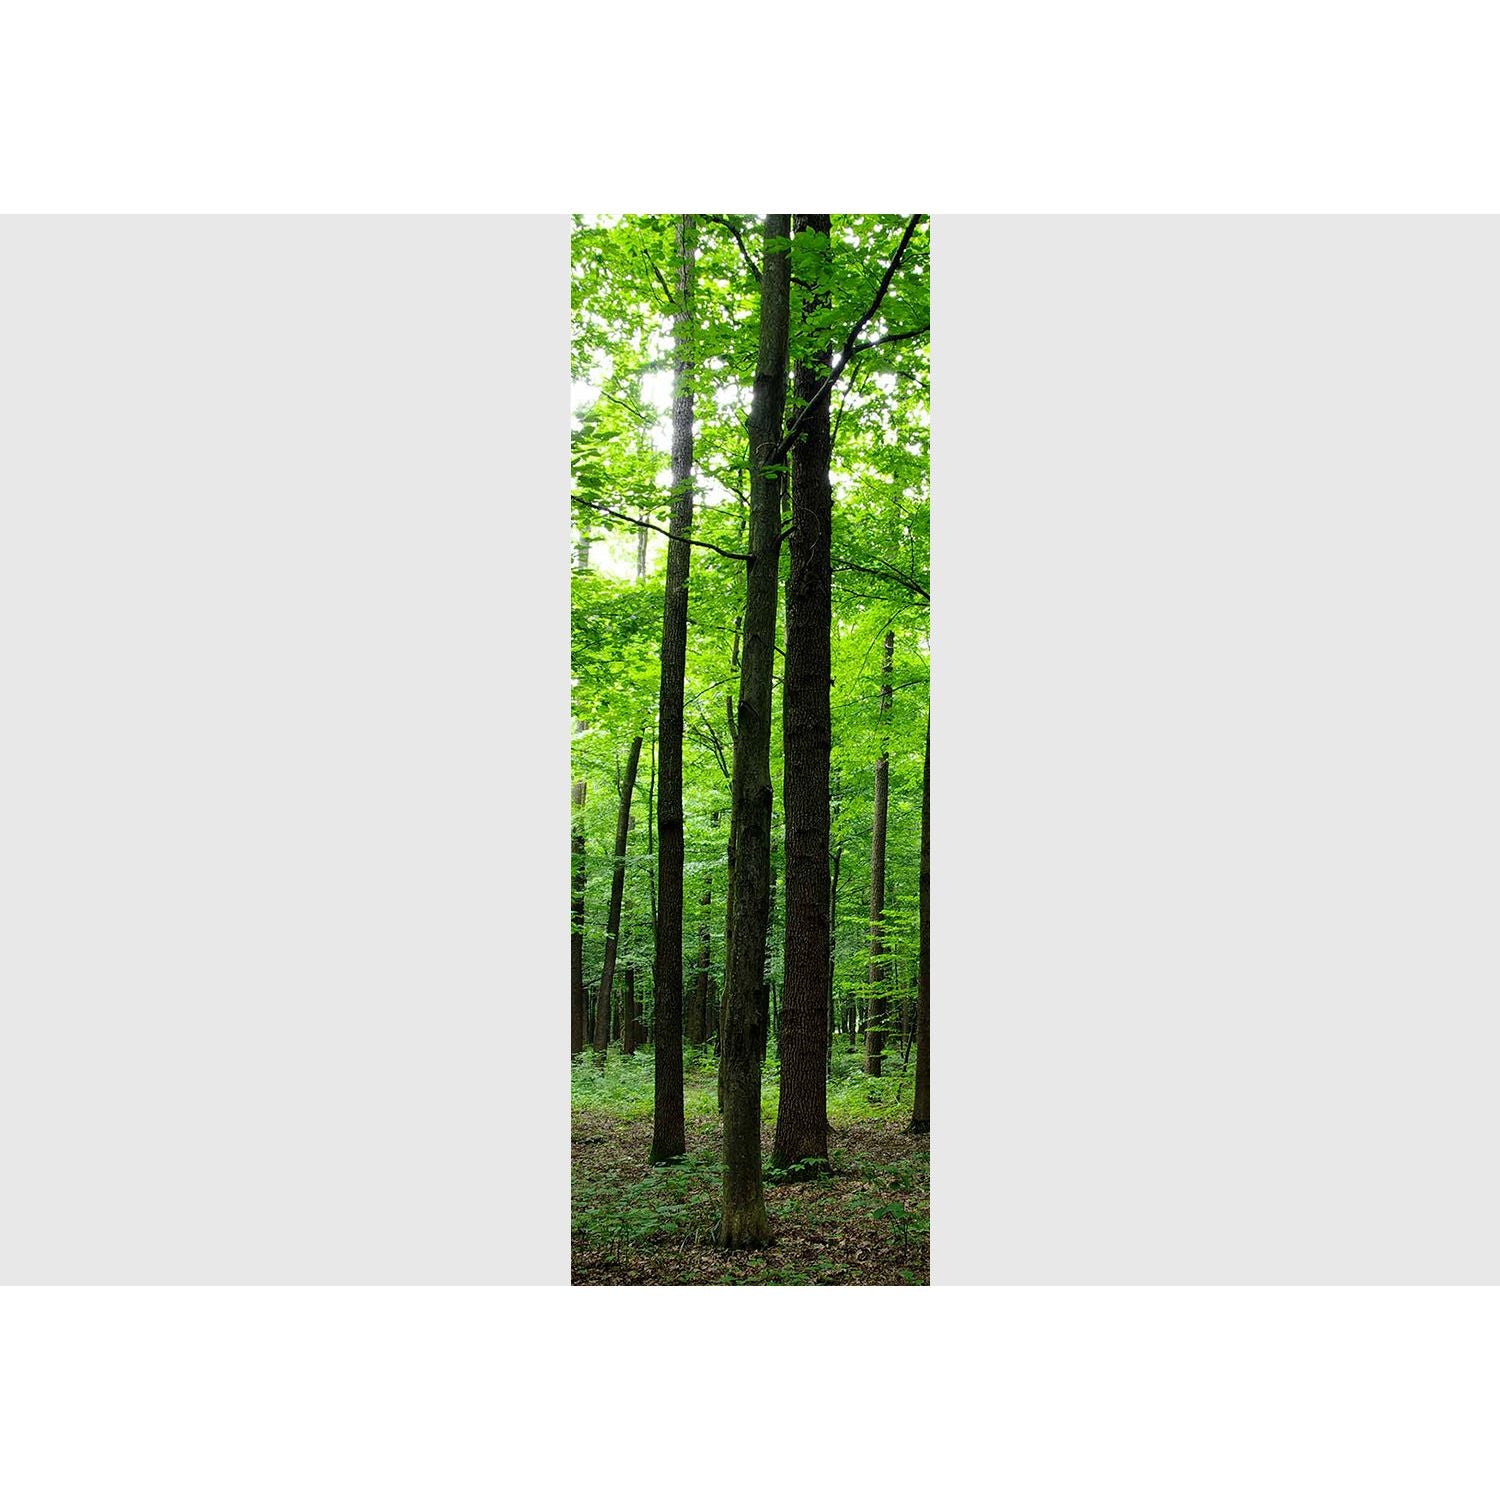 Towering Forest: High Trees & Green Leafs Wall Mural